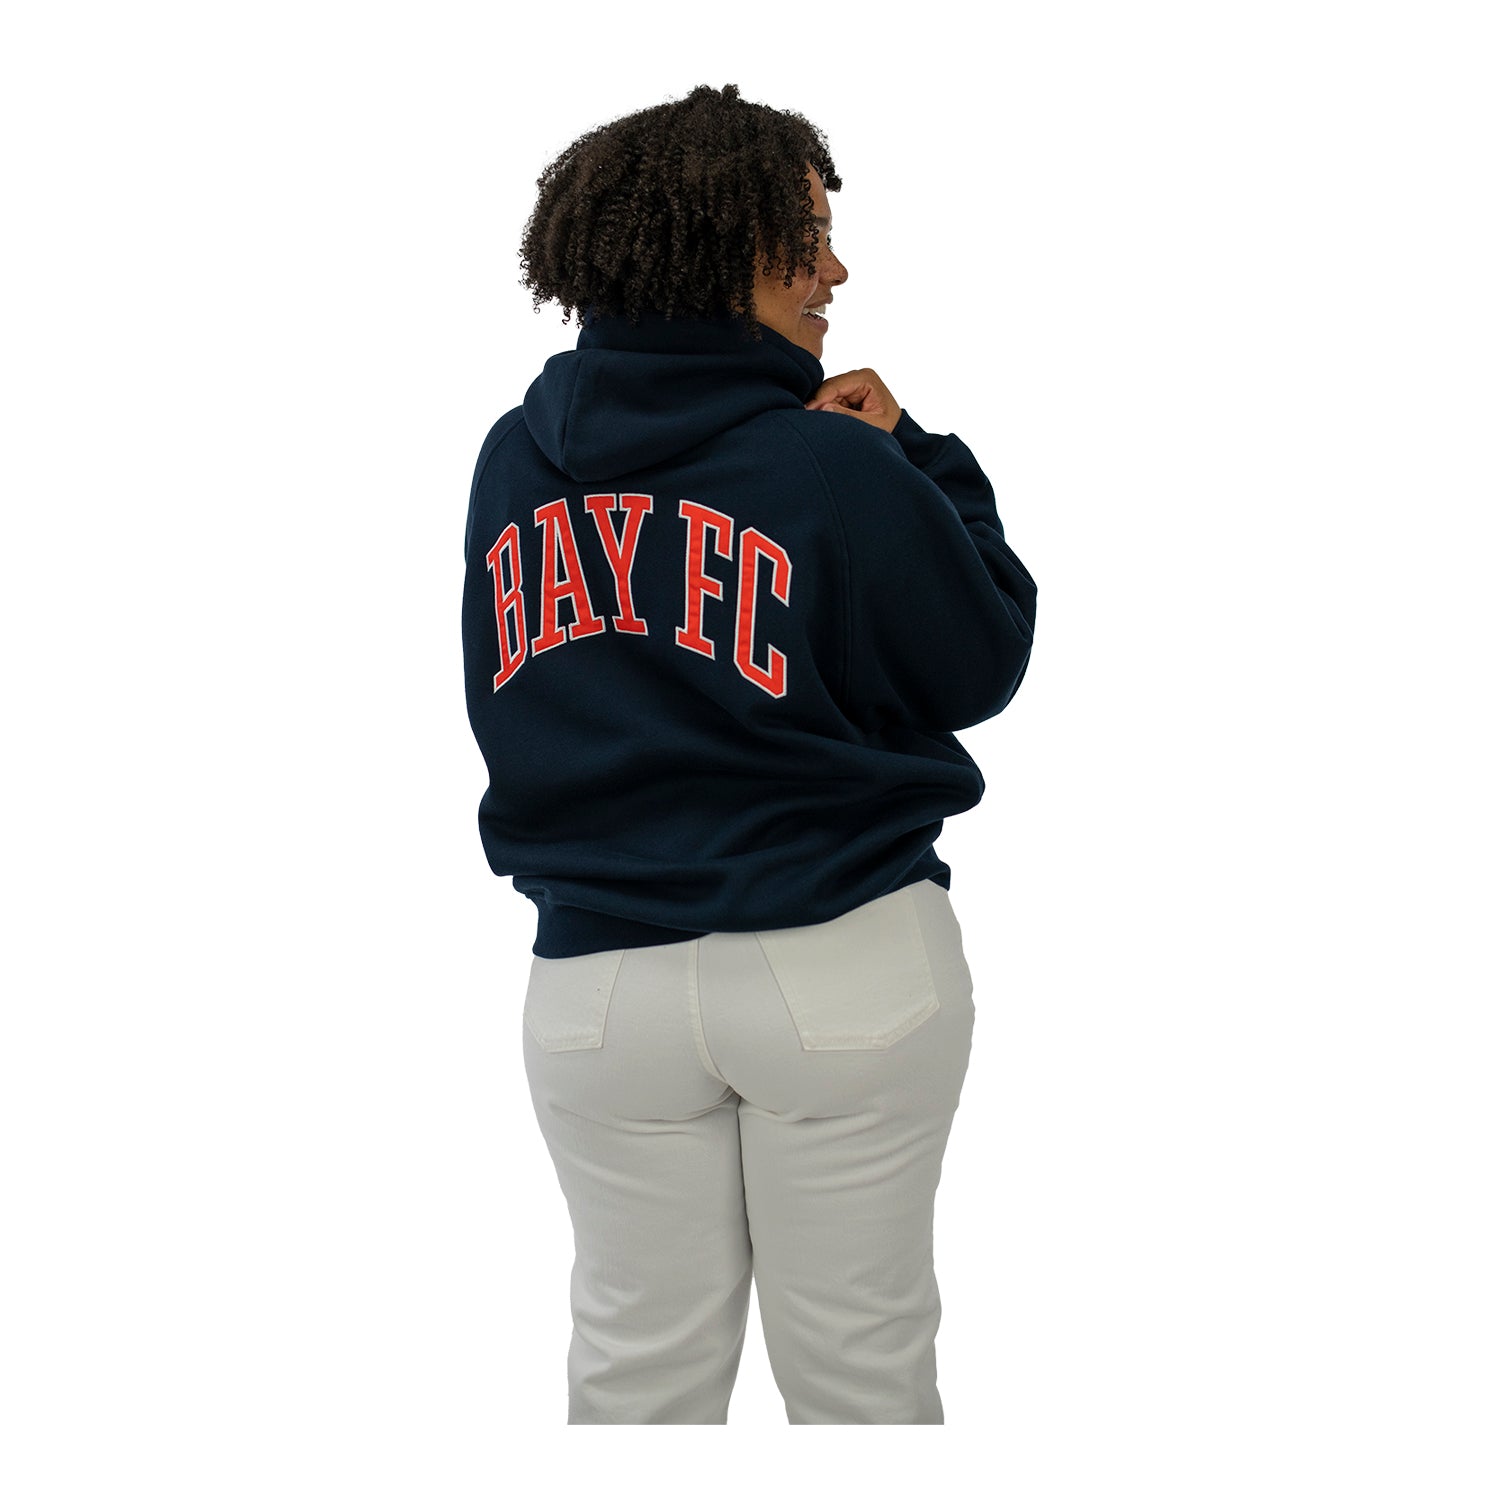 Unisex Official Bay FC Oversized Terry Navy Hoodie - On Model Back and Side View